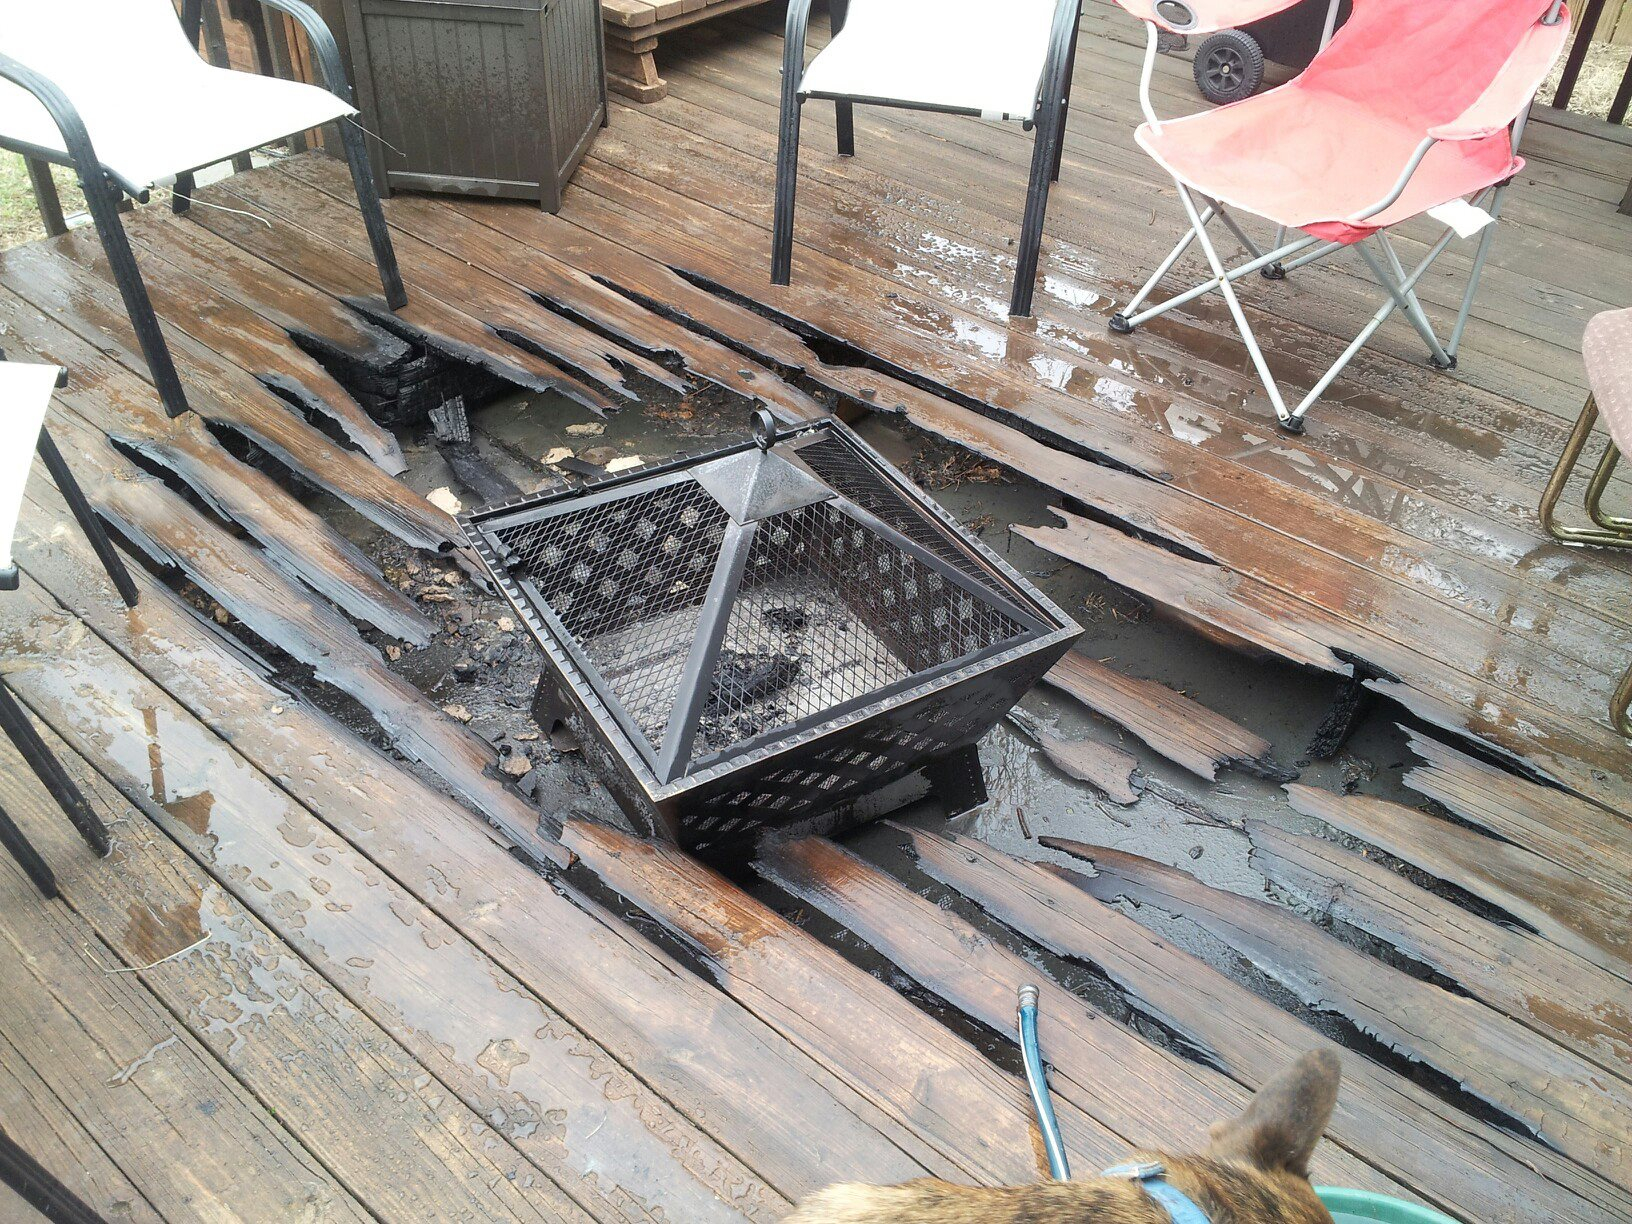 Ill Just Put This Fire Pit On A Wooden Floor Wcgw X Post From R regarding proportions 1632 X 1224